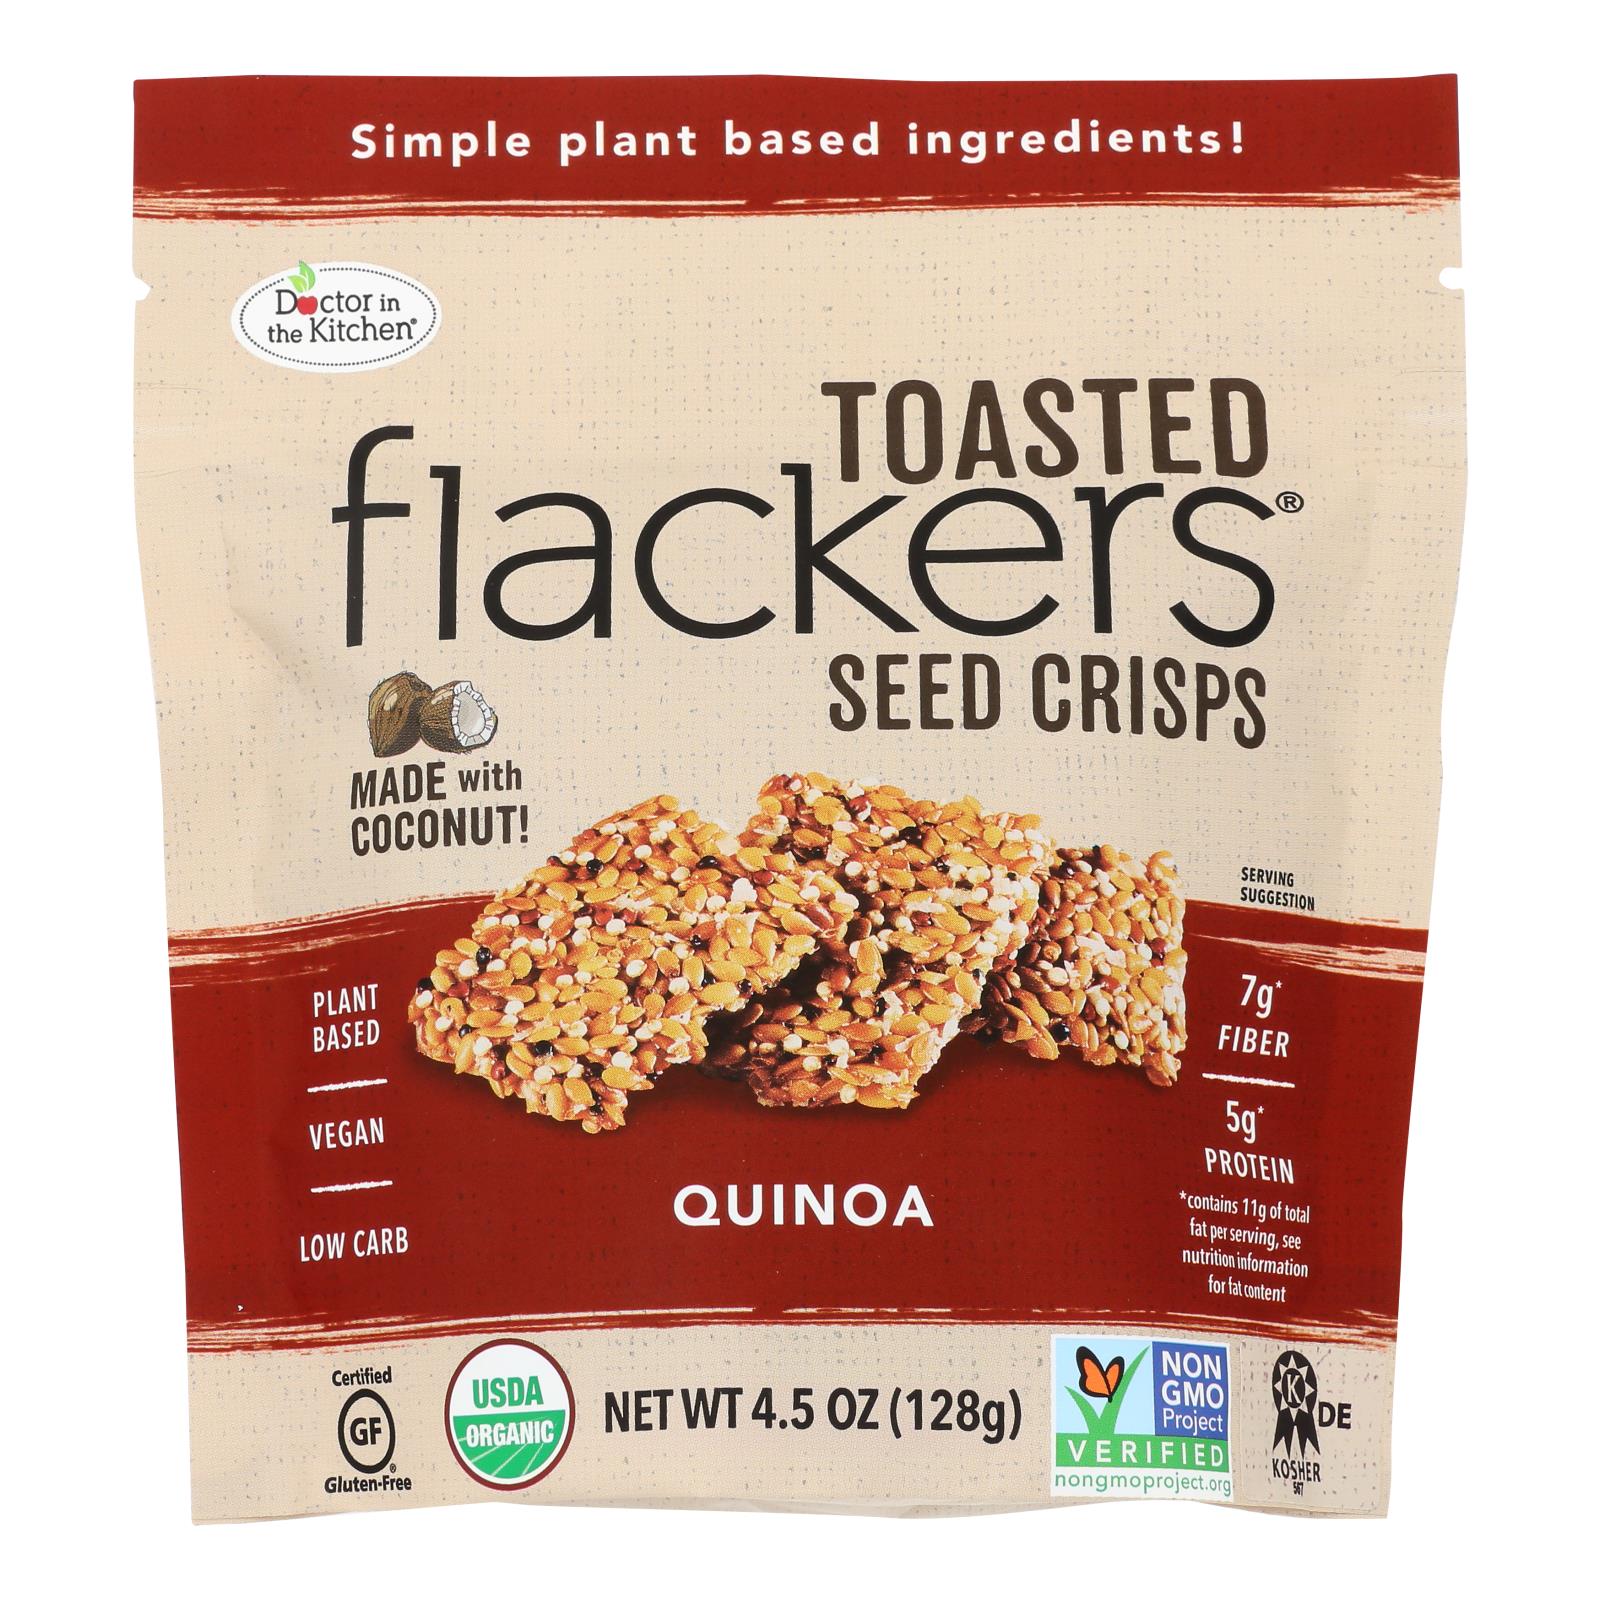 Dr. In The Kitchen - Flackers Toasted Quinoa - Case of 6 - 4.5 OZ